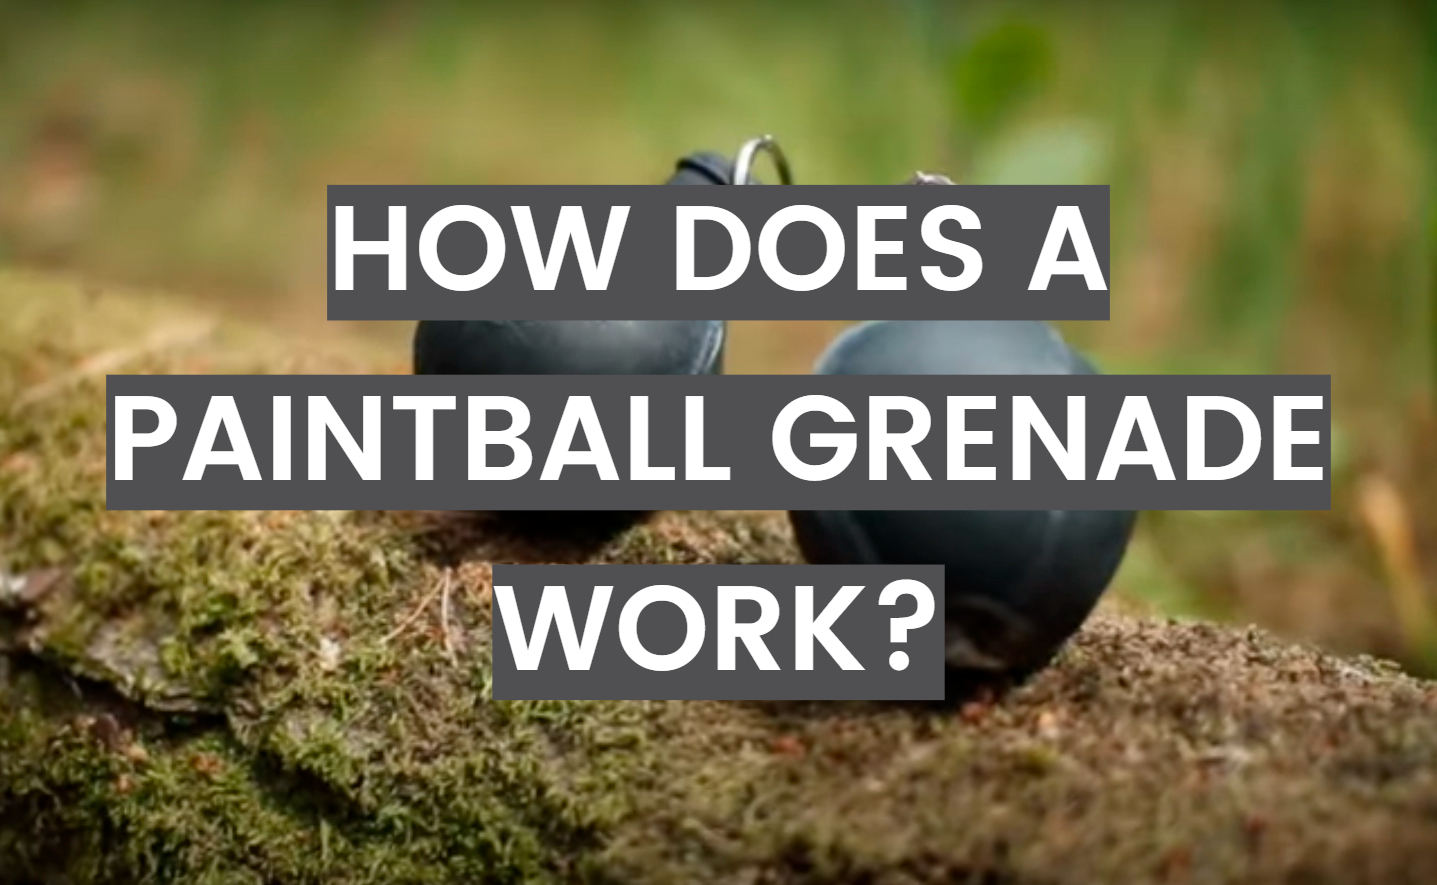 How Does a Paintball Grenade Work?